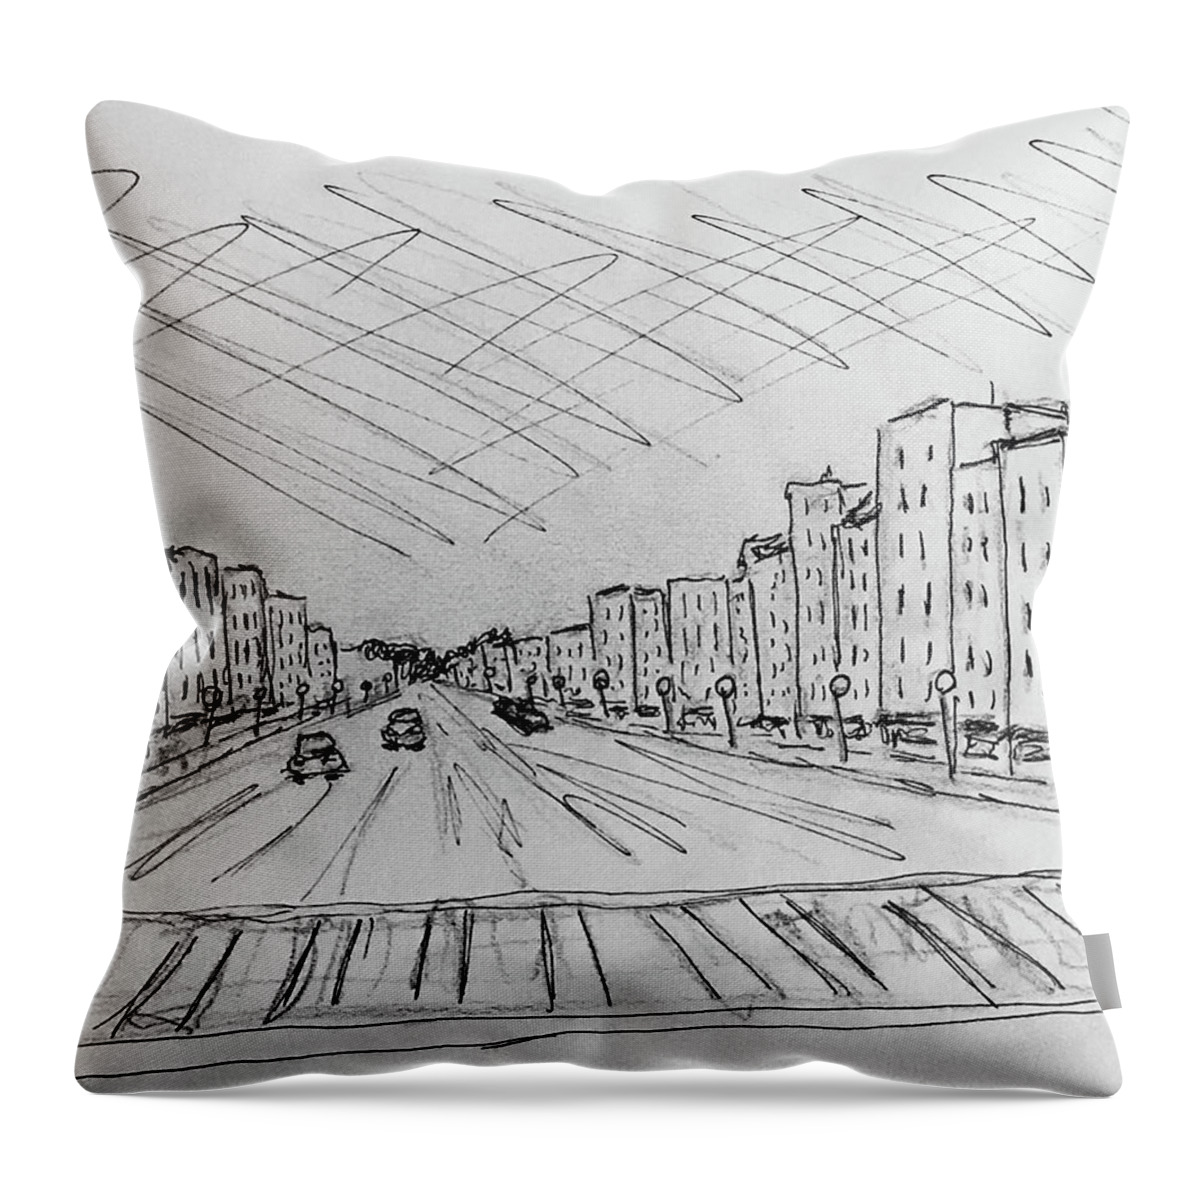  Throw Pillow featuring the painting Georgetown Sketch by John Macarthur